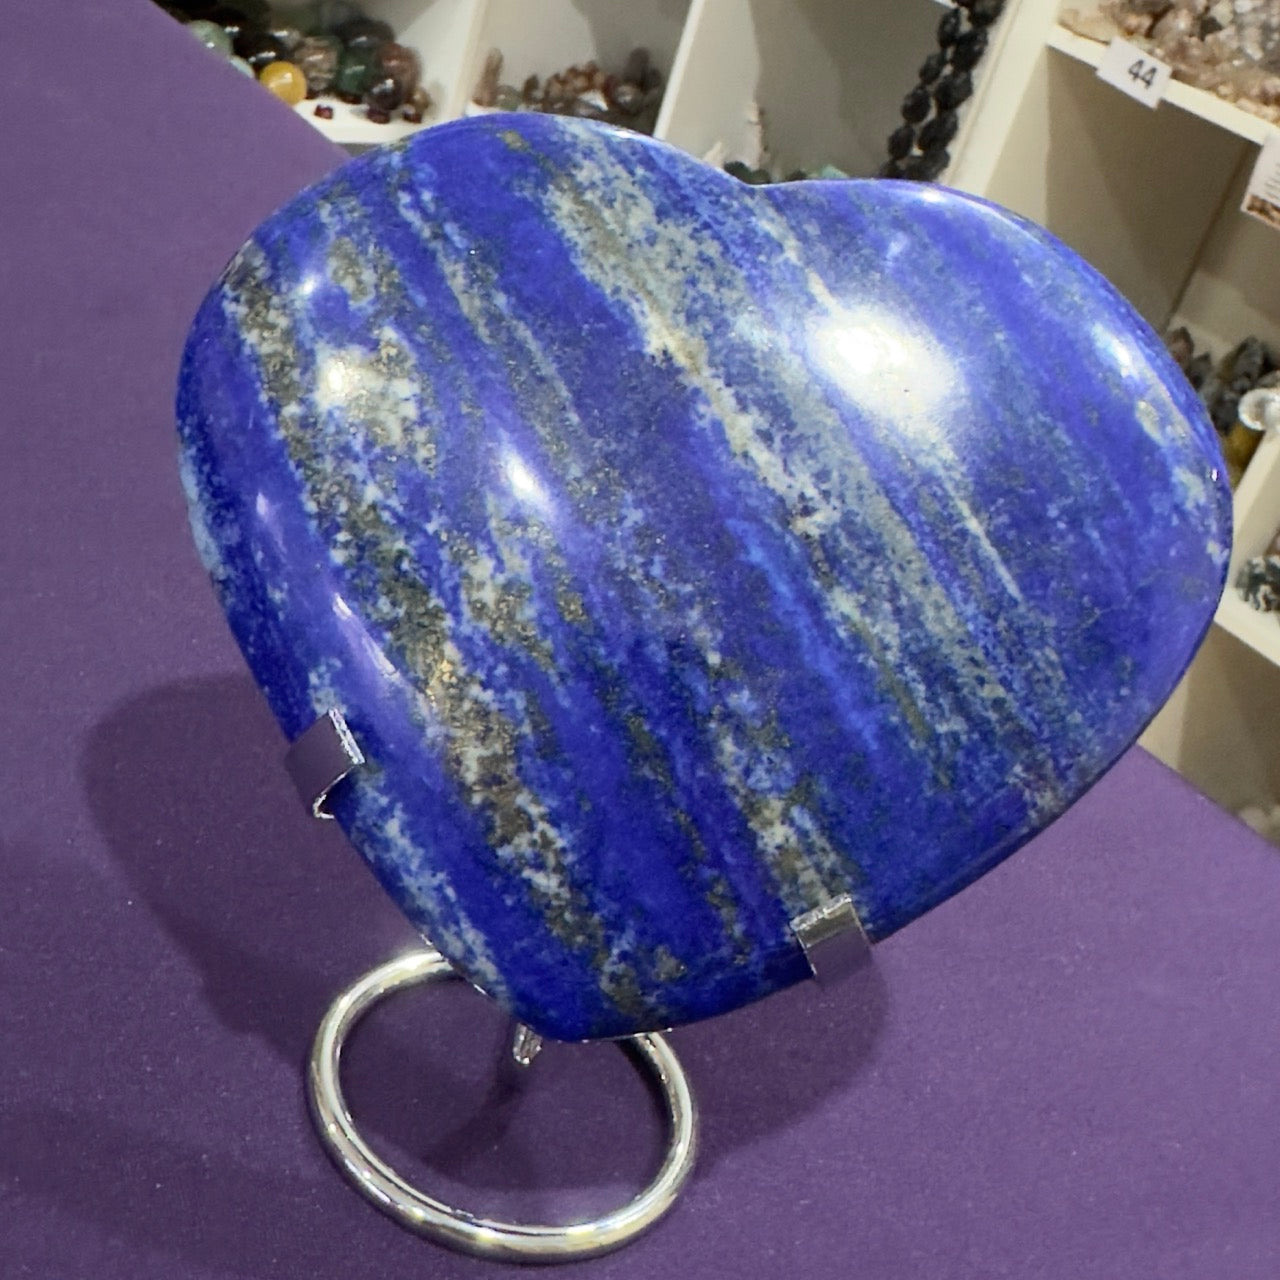 Lapis Lazuli Heart with Stand